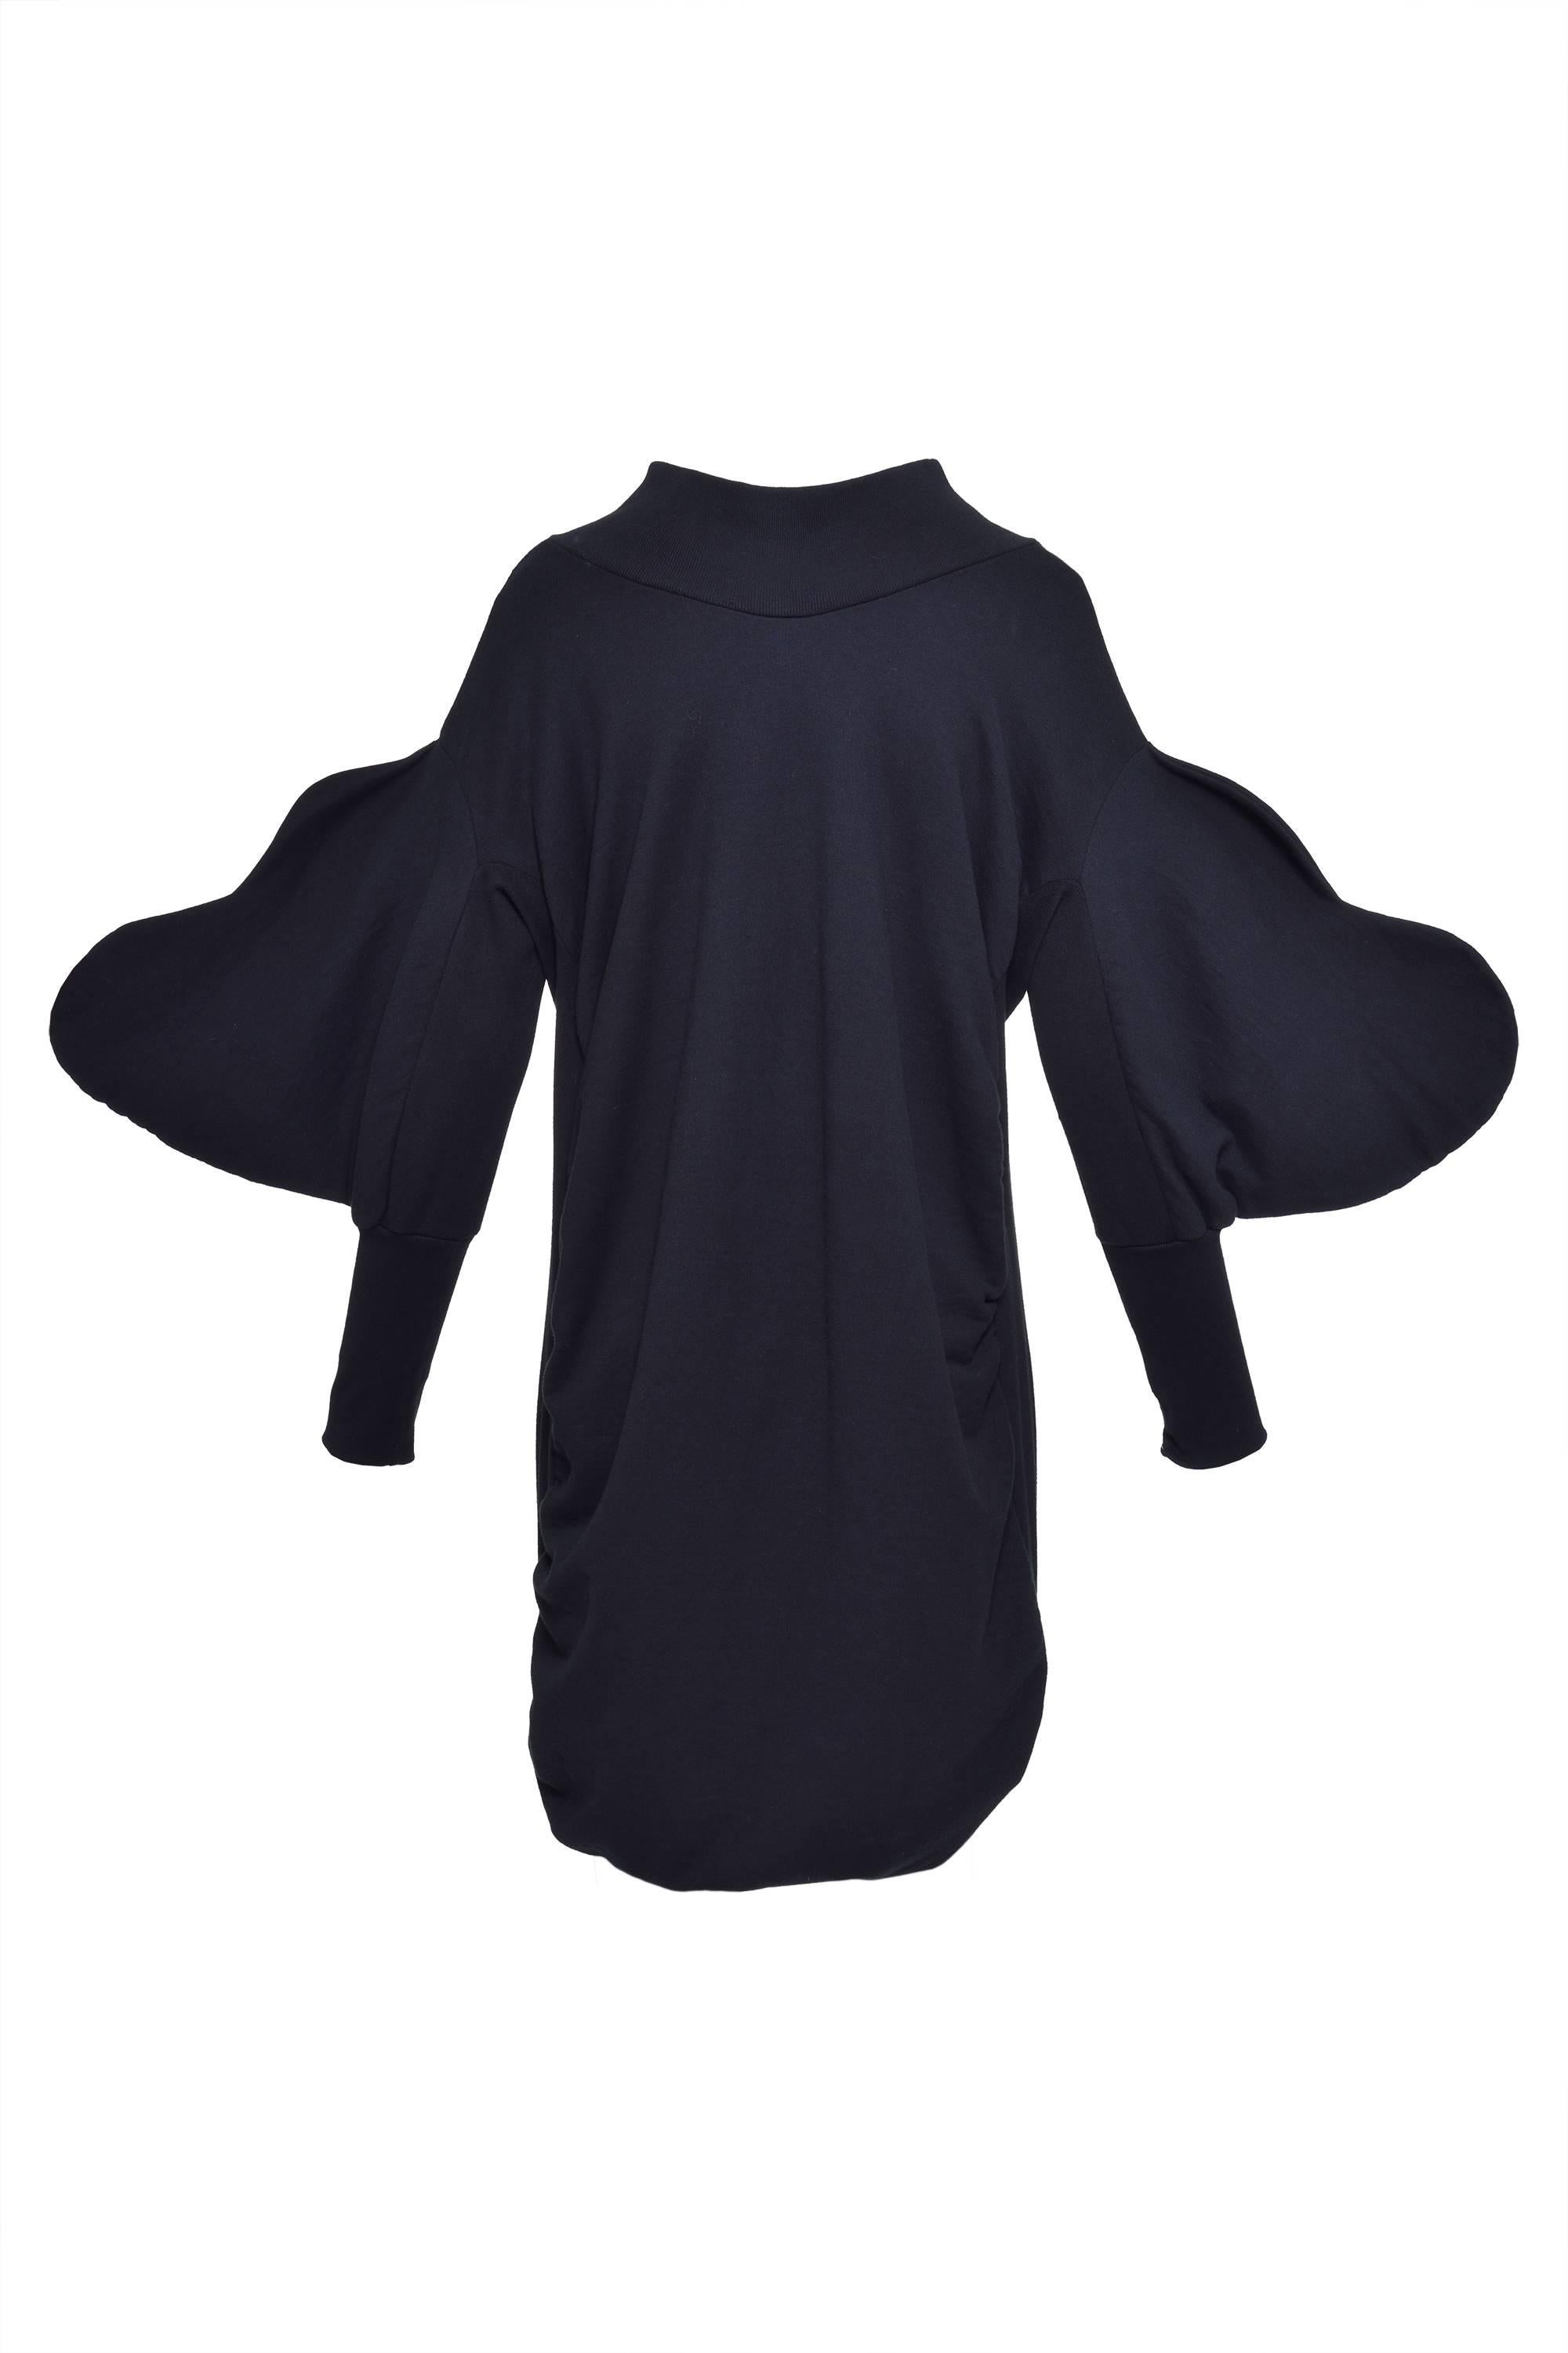 This gorgeous Limited edition designed by Bernhard Willhelm for 10 CORSO COMO Milan Sweater dress is in dark blue sweatshirt cotton with draped sides, v neckline and hearts sleeves and balloon skirt.  

Excellent Condition 

Label: BERNHARD WILLHELM